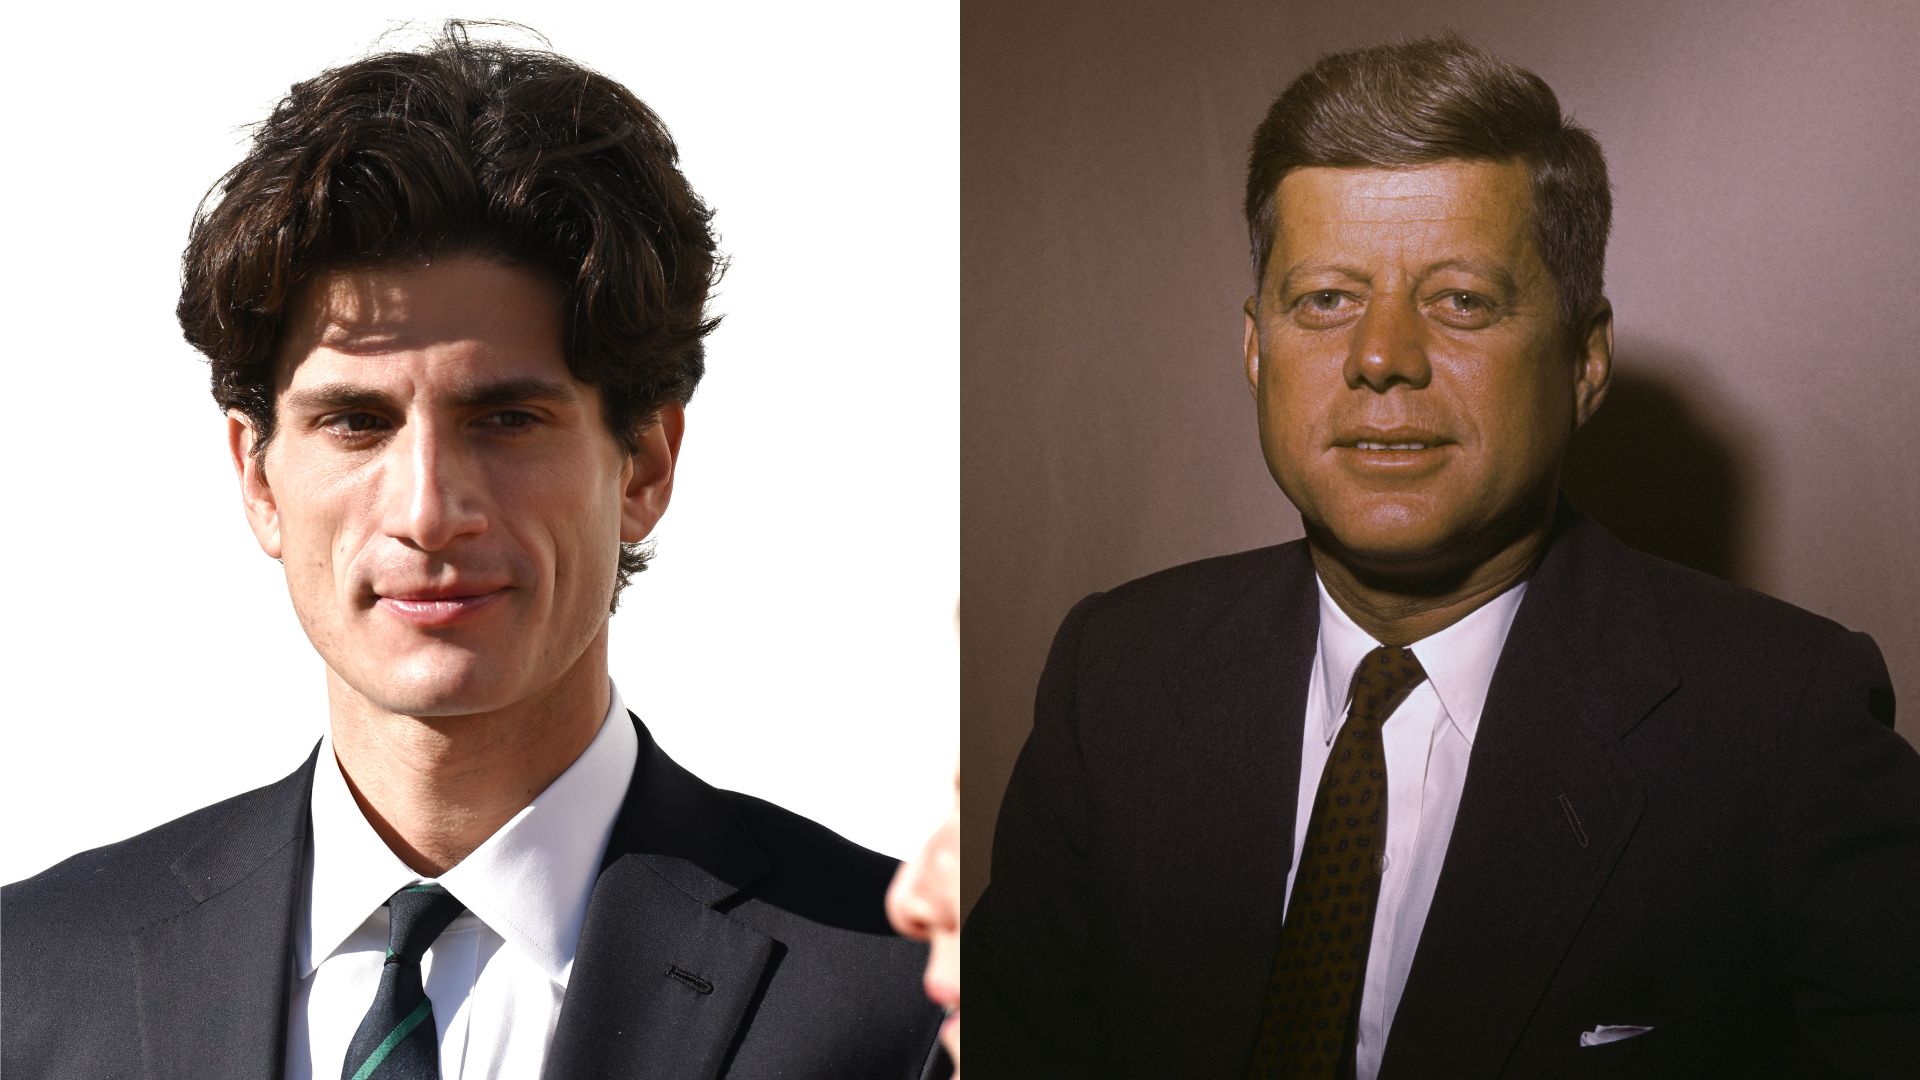 Split image of Jack Schlossberg and his grandfather, John F. Kennedy.